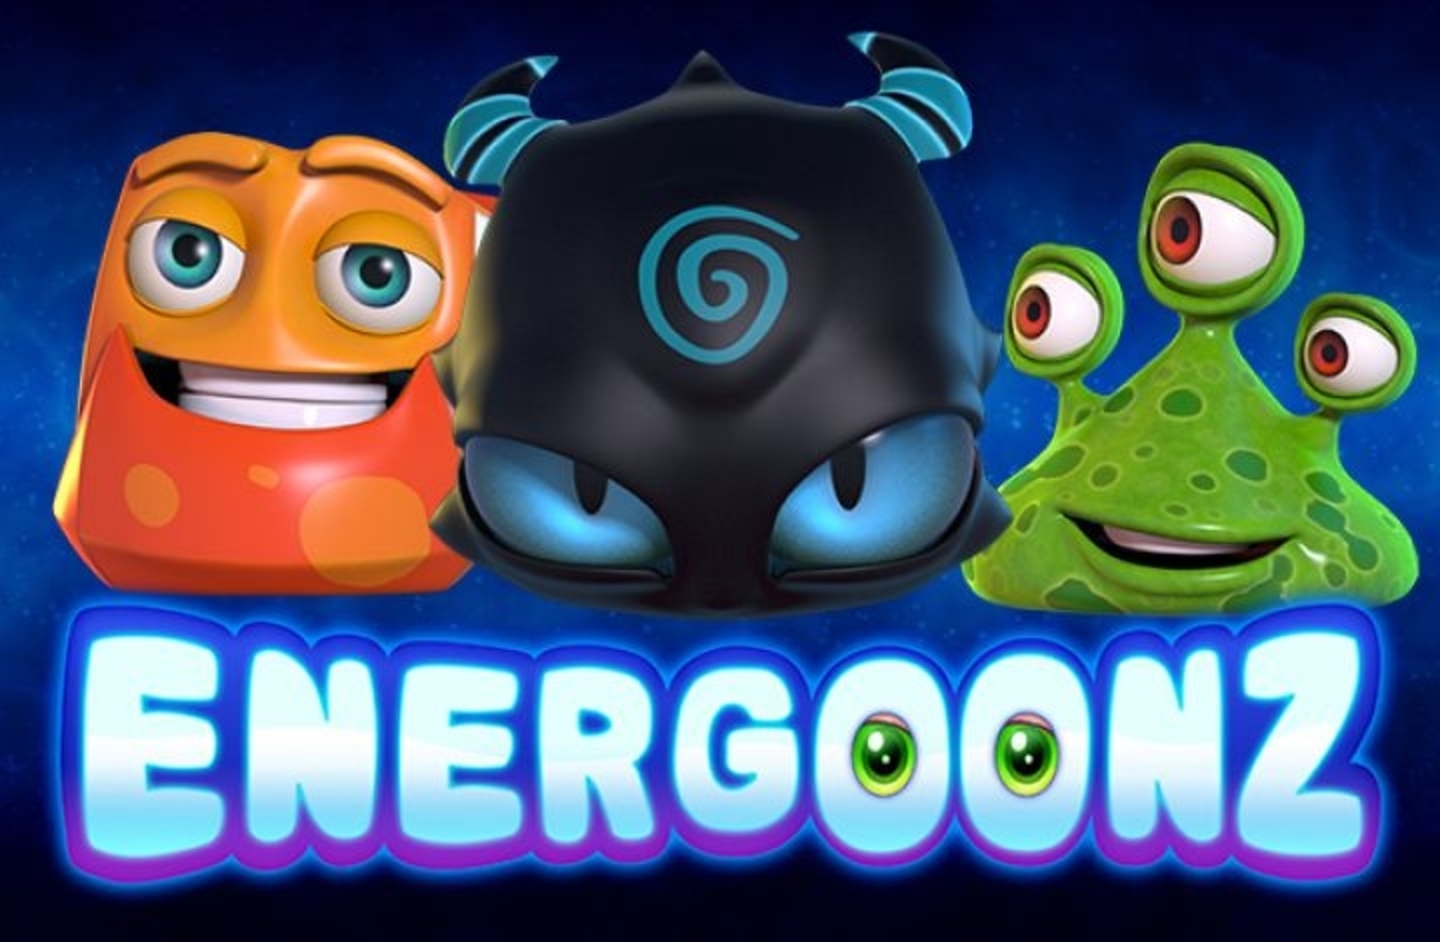 The Energoonz Online Slot Demo Game by Playn GO